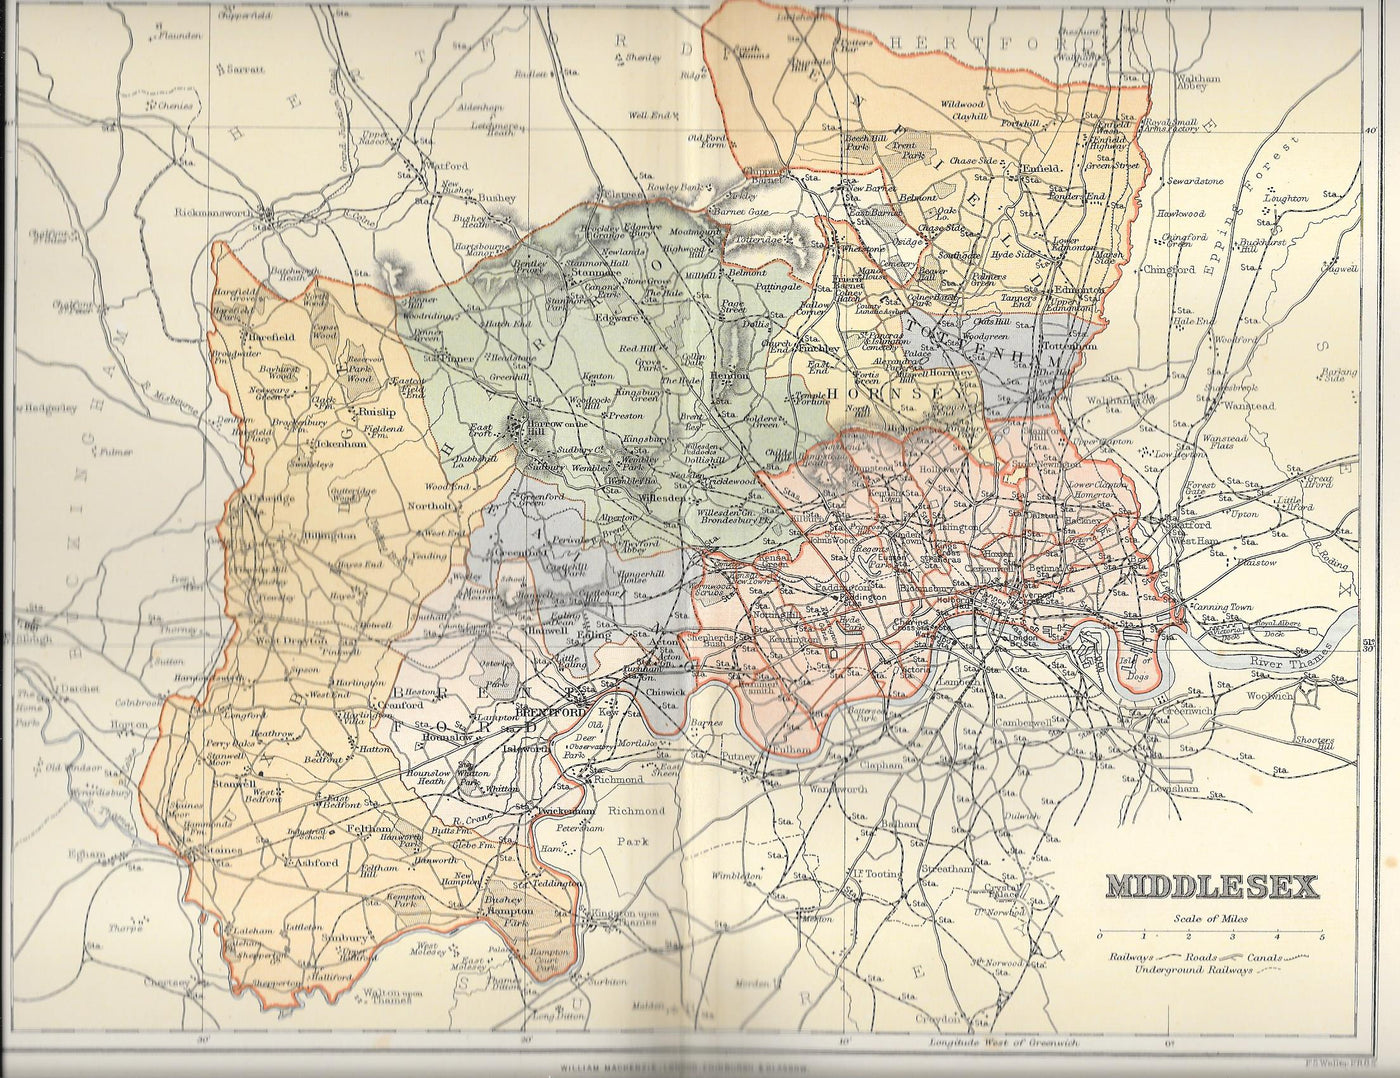 Middlesex antique map